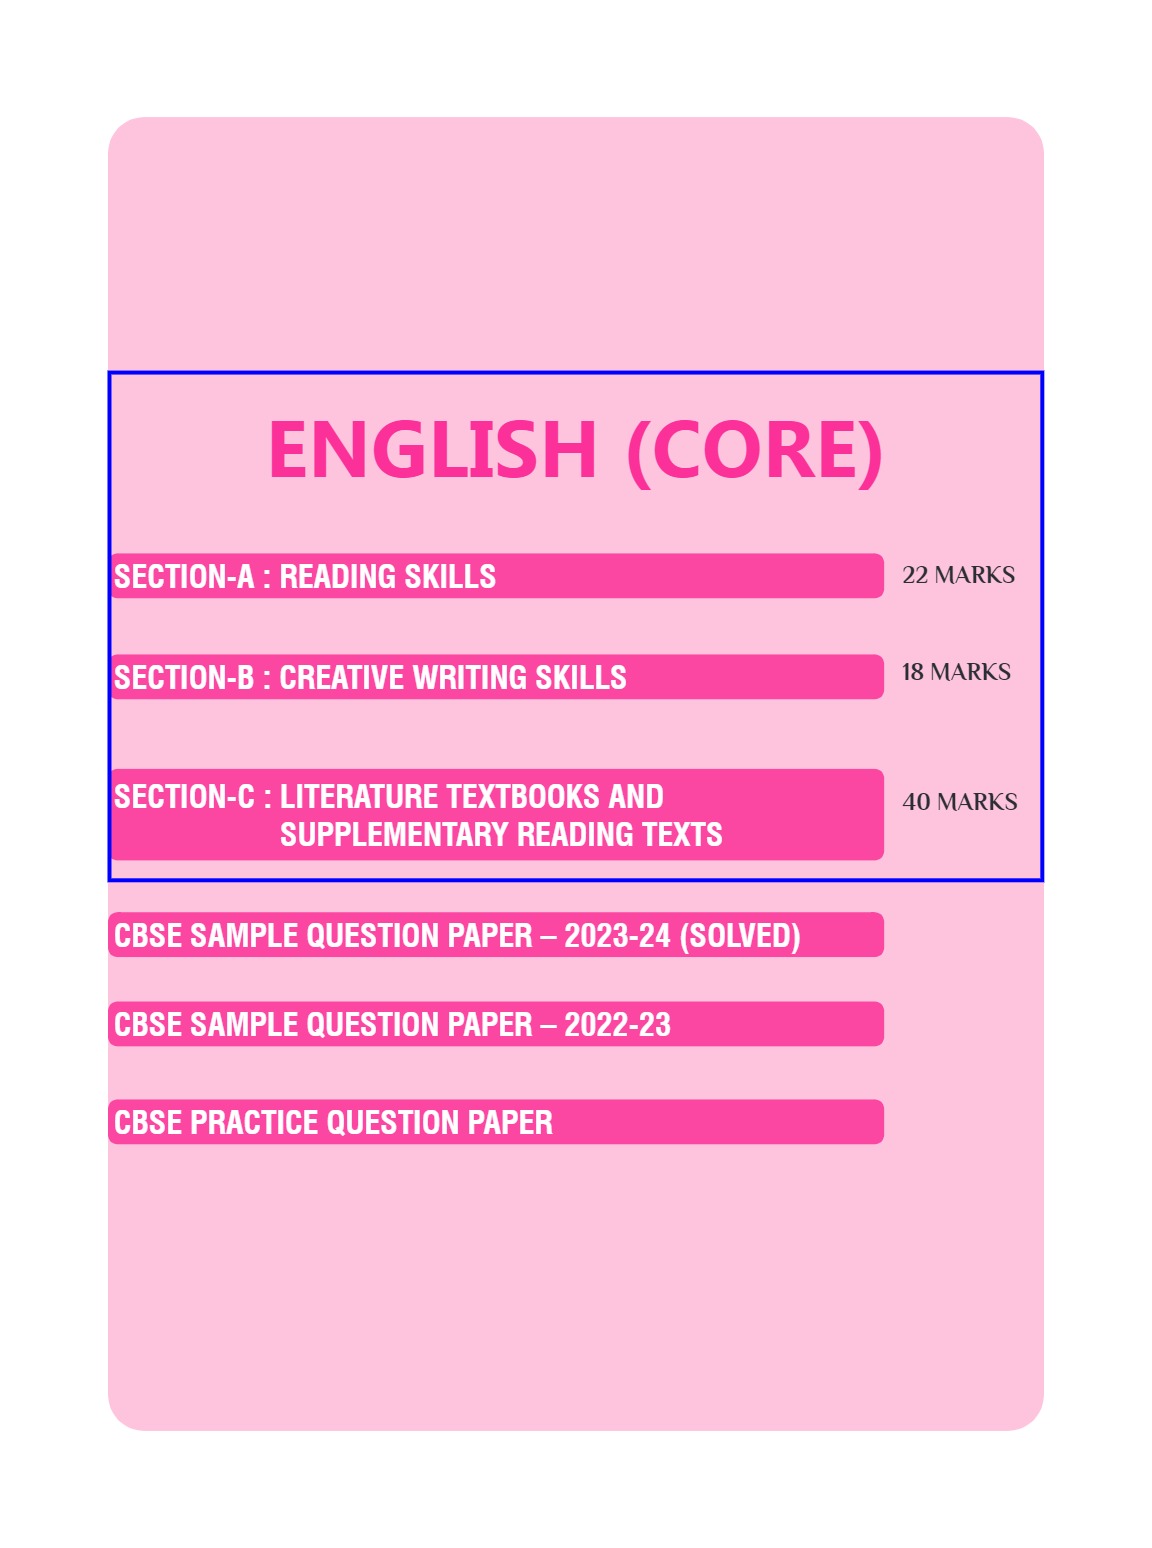 Xam idea English core Class 12 Book | CBSE Board | Chapterwise Question Bank | Based on Revised CBSE Syllabus | NCERT Questions Included | 2024-25 Exam